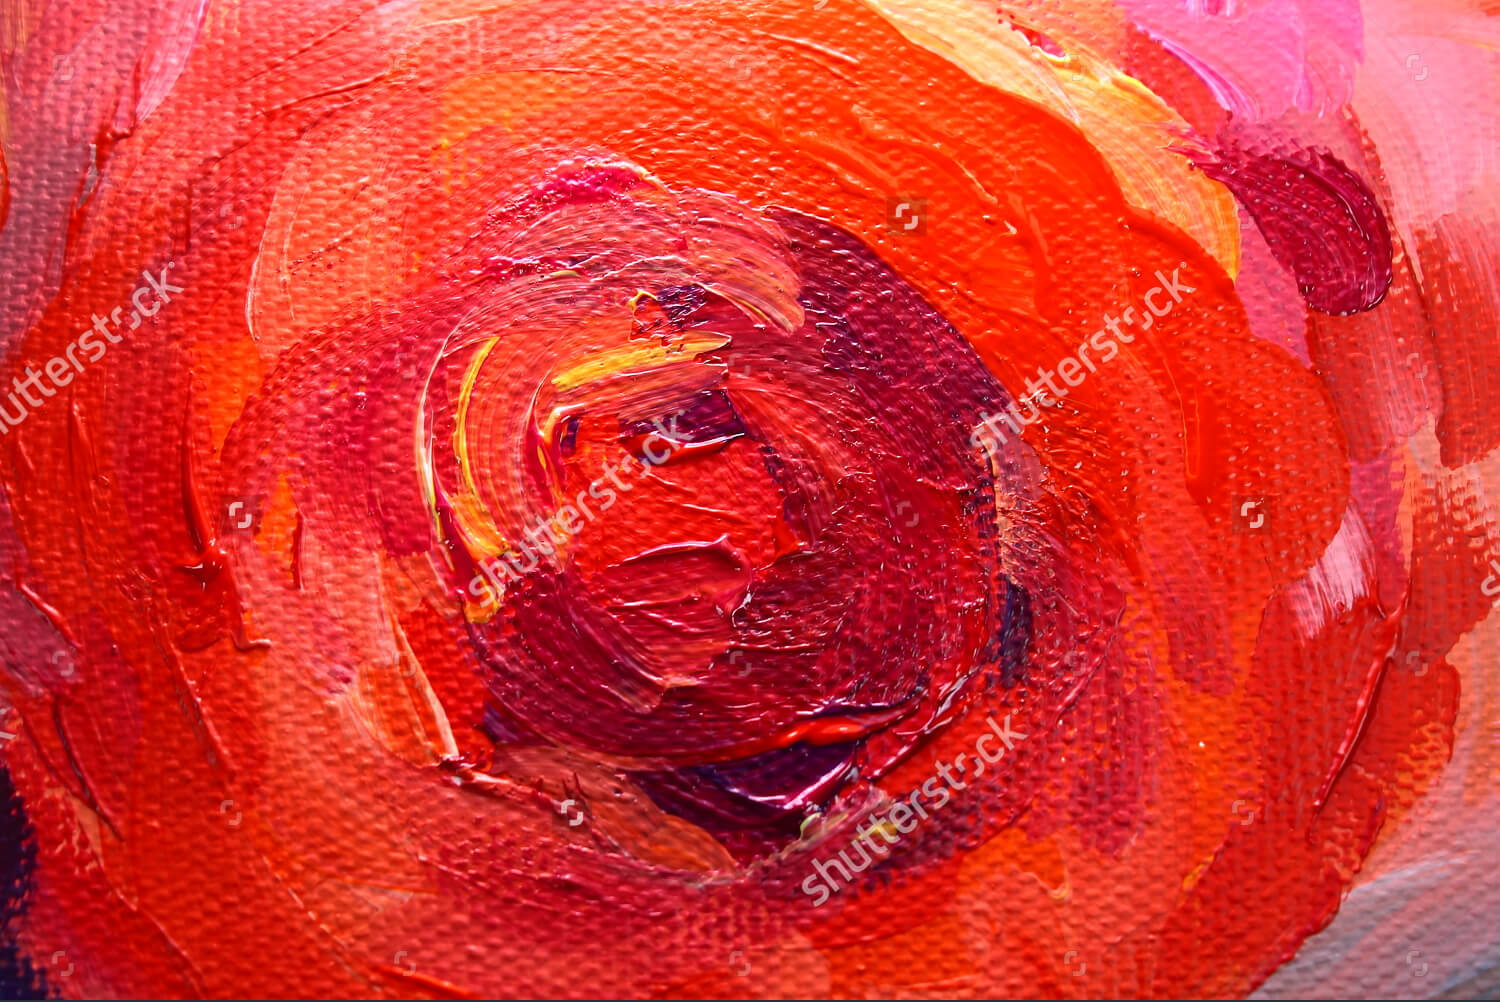 22 Rose  Paintings Art Ideas Pictures Images Design  